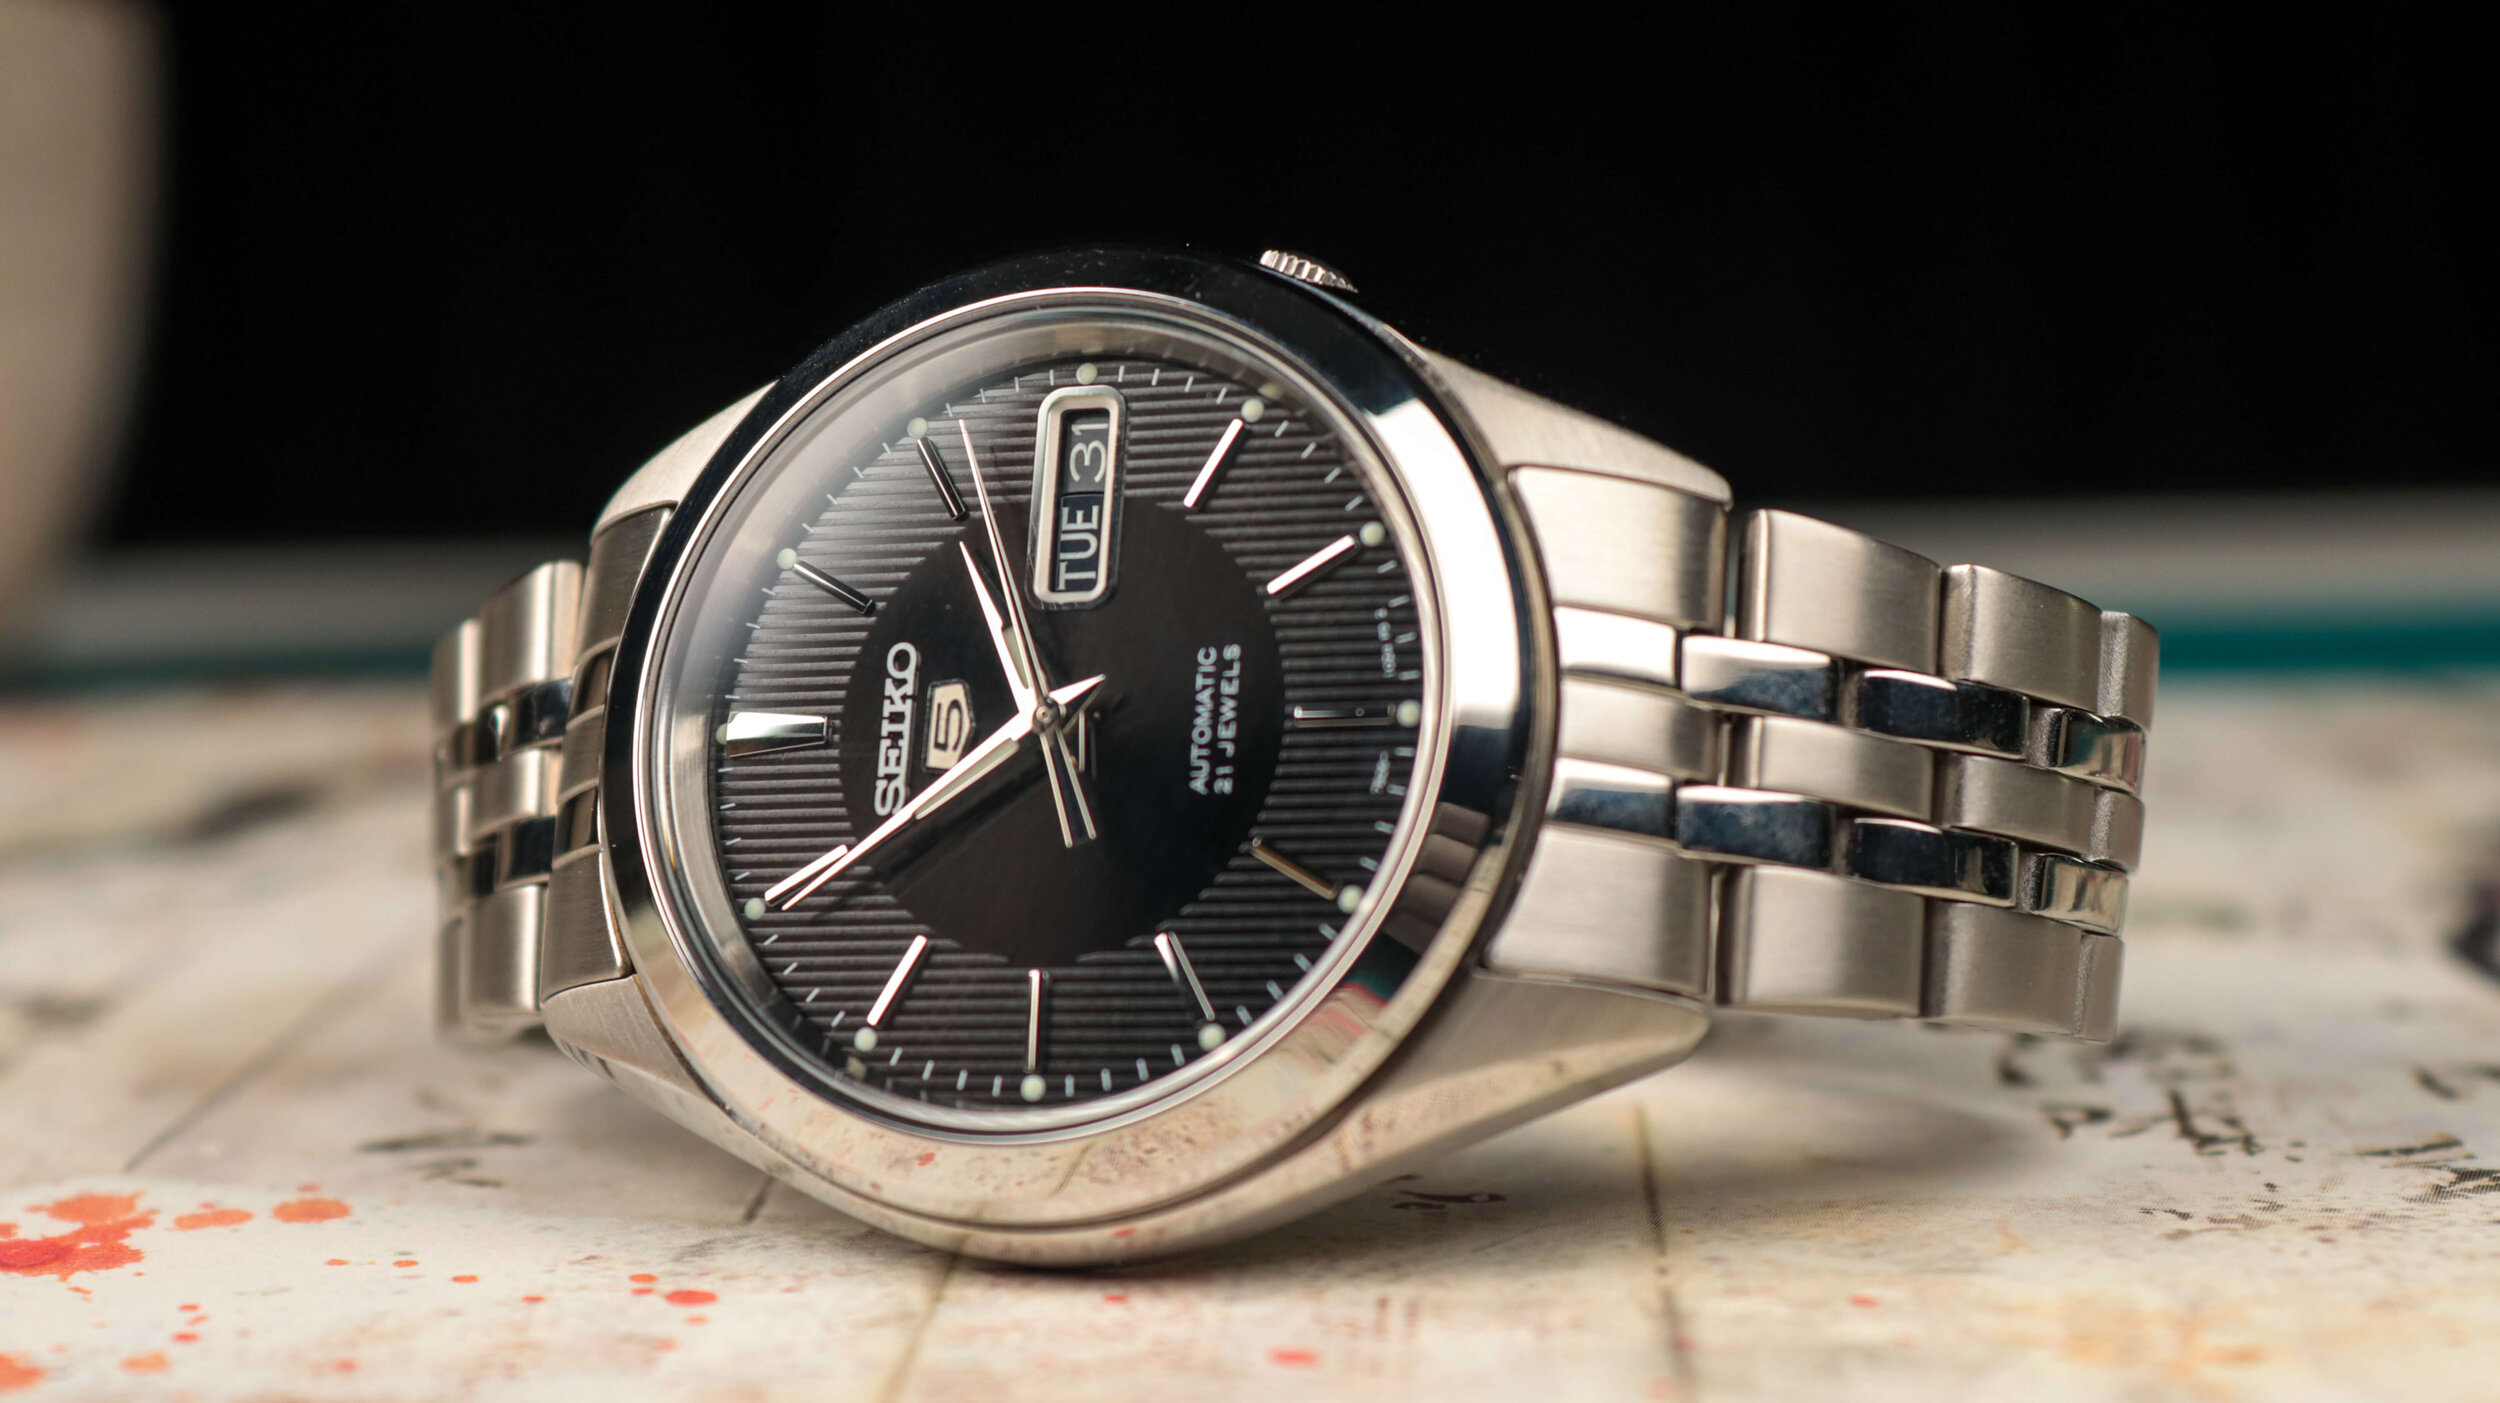 Seiko SNKL23 Review - Seiko’s Best Cheap Watch Is Returning? — Ben's ...